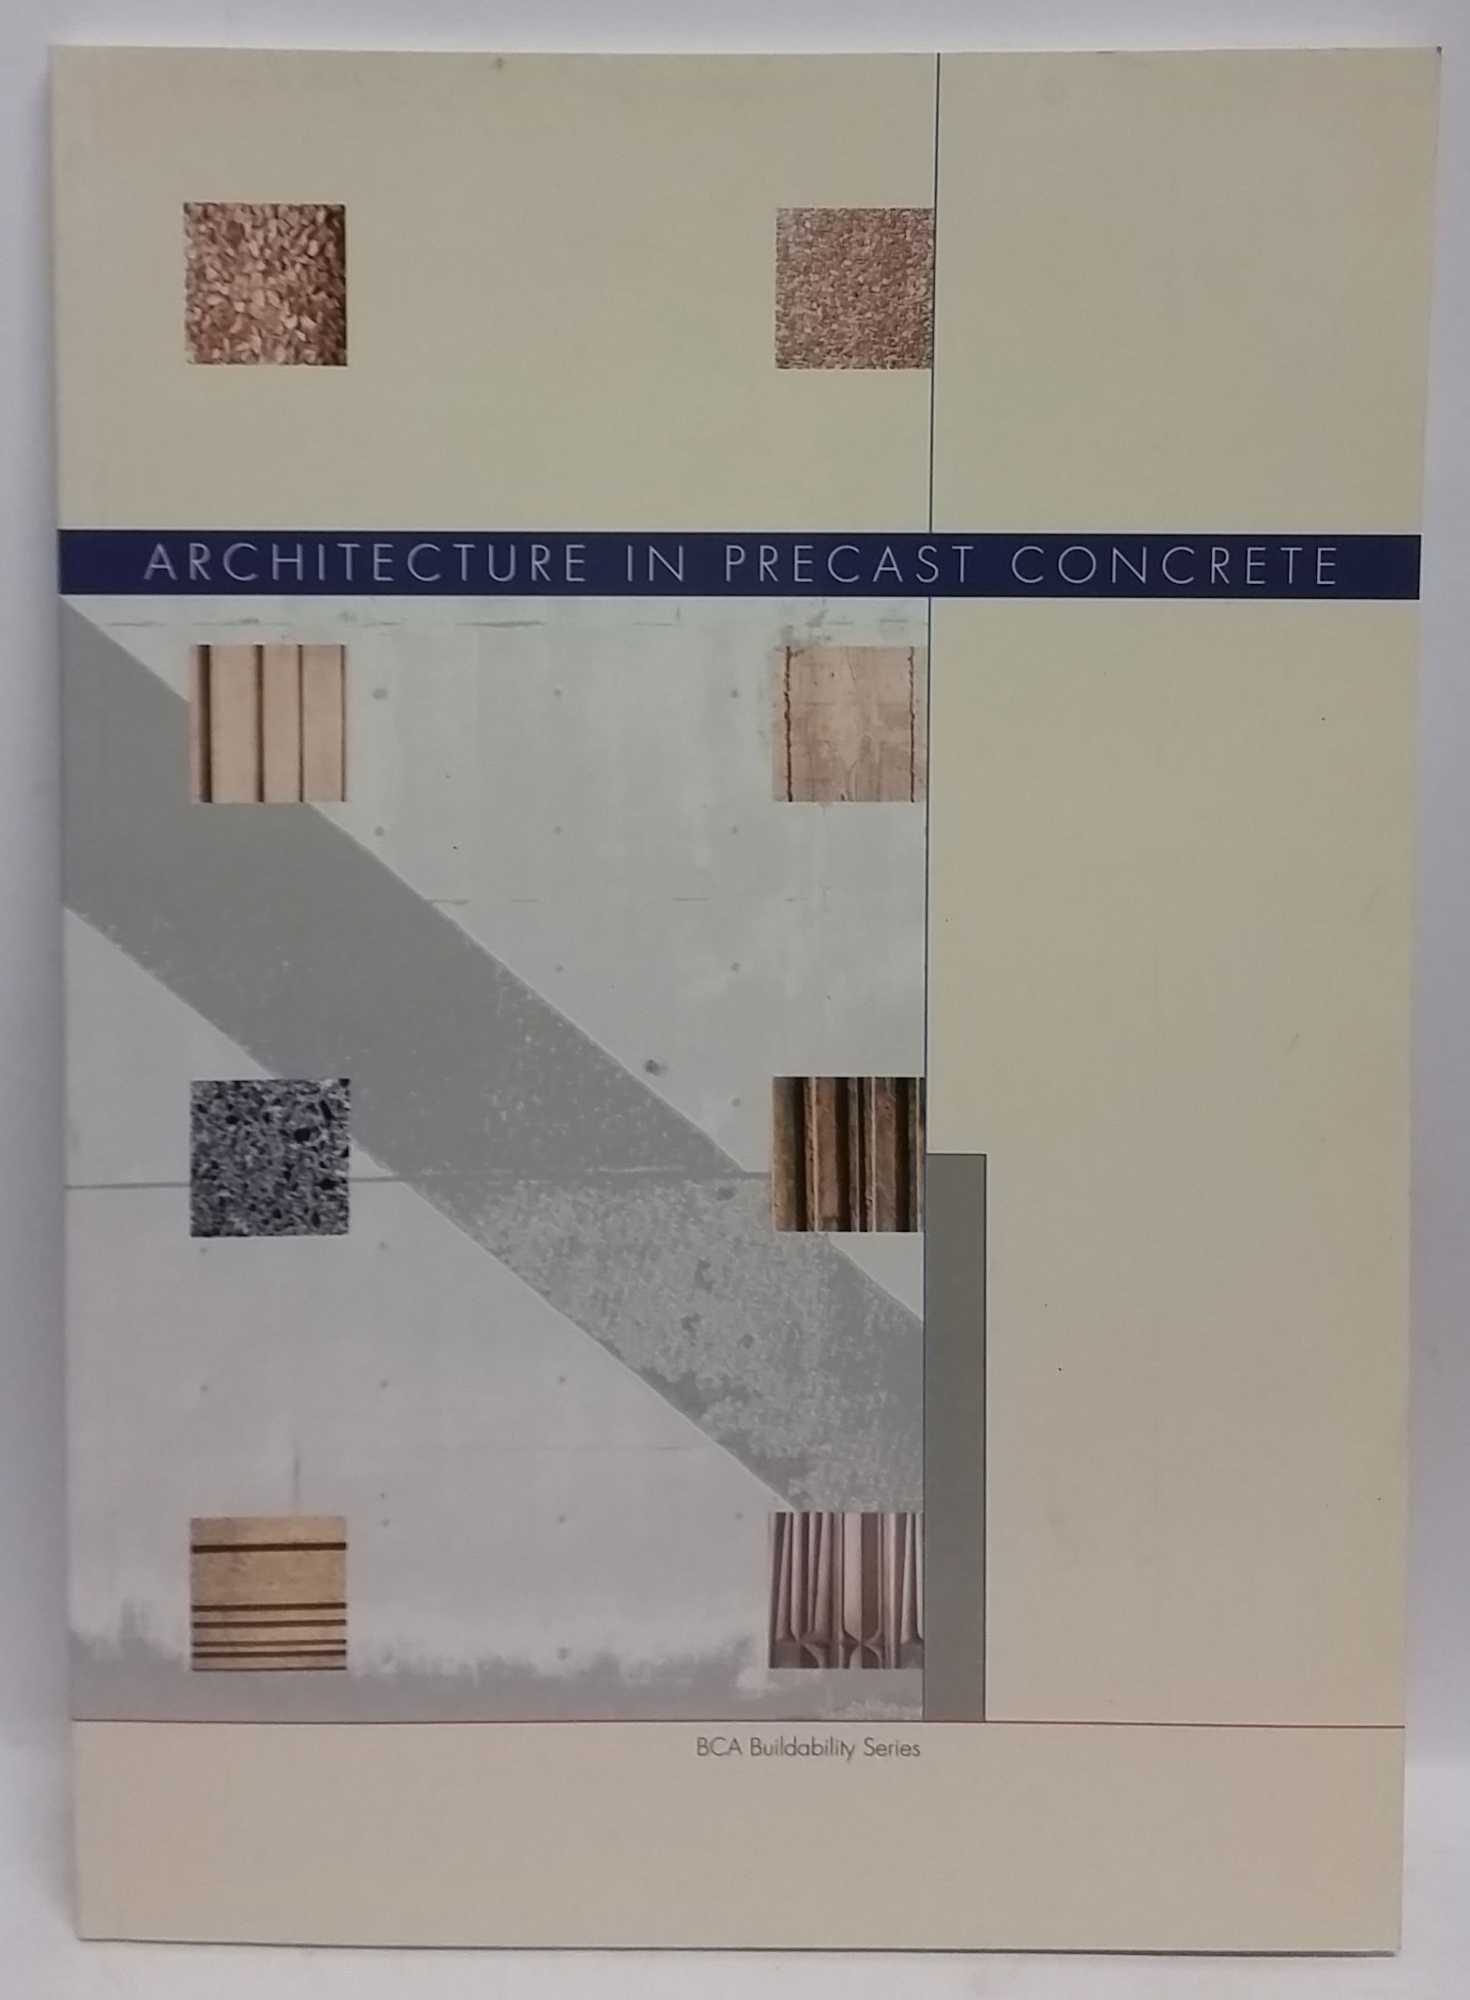 Building and Construction Authority; Singapore Institute of Architects - Architecture in Precast Concrete